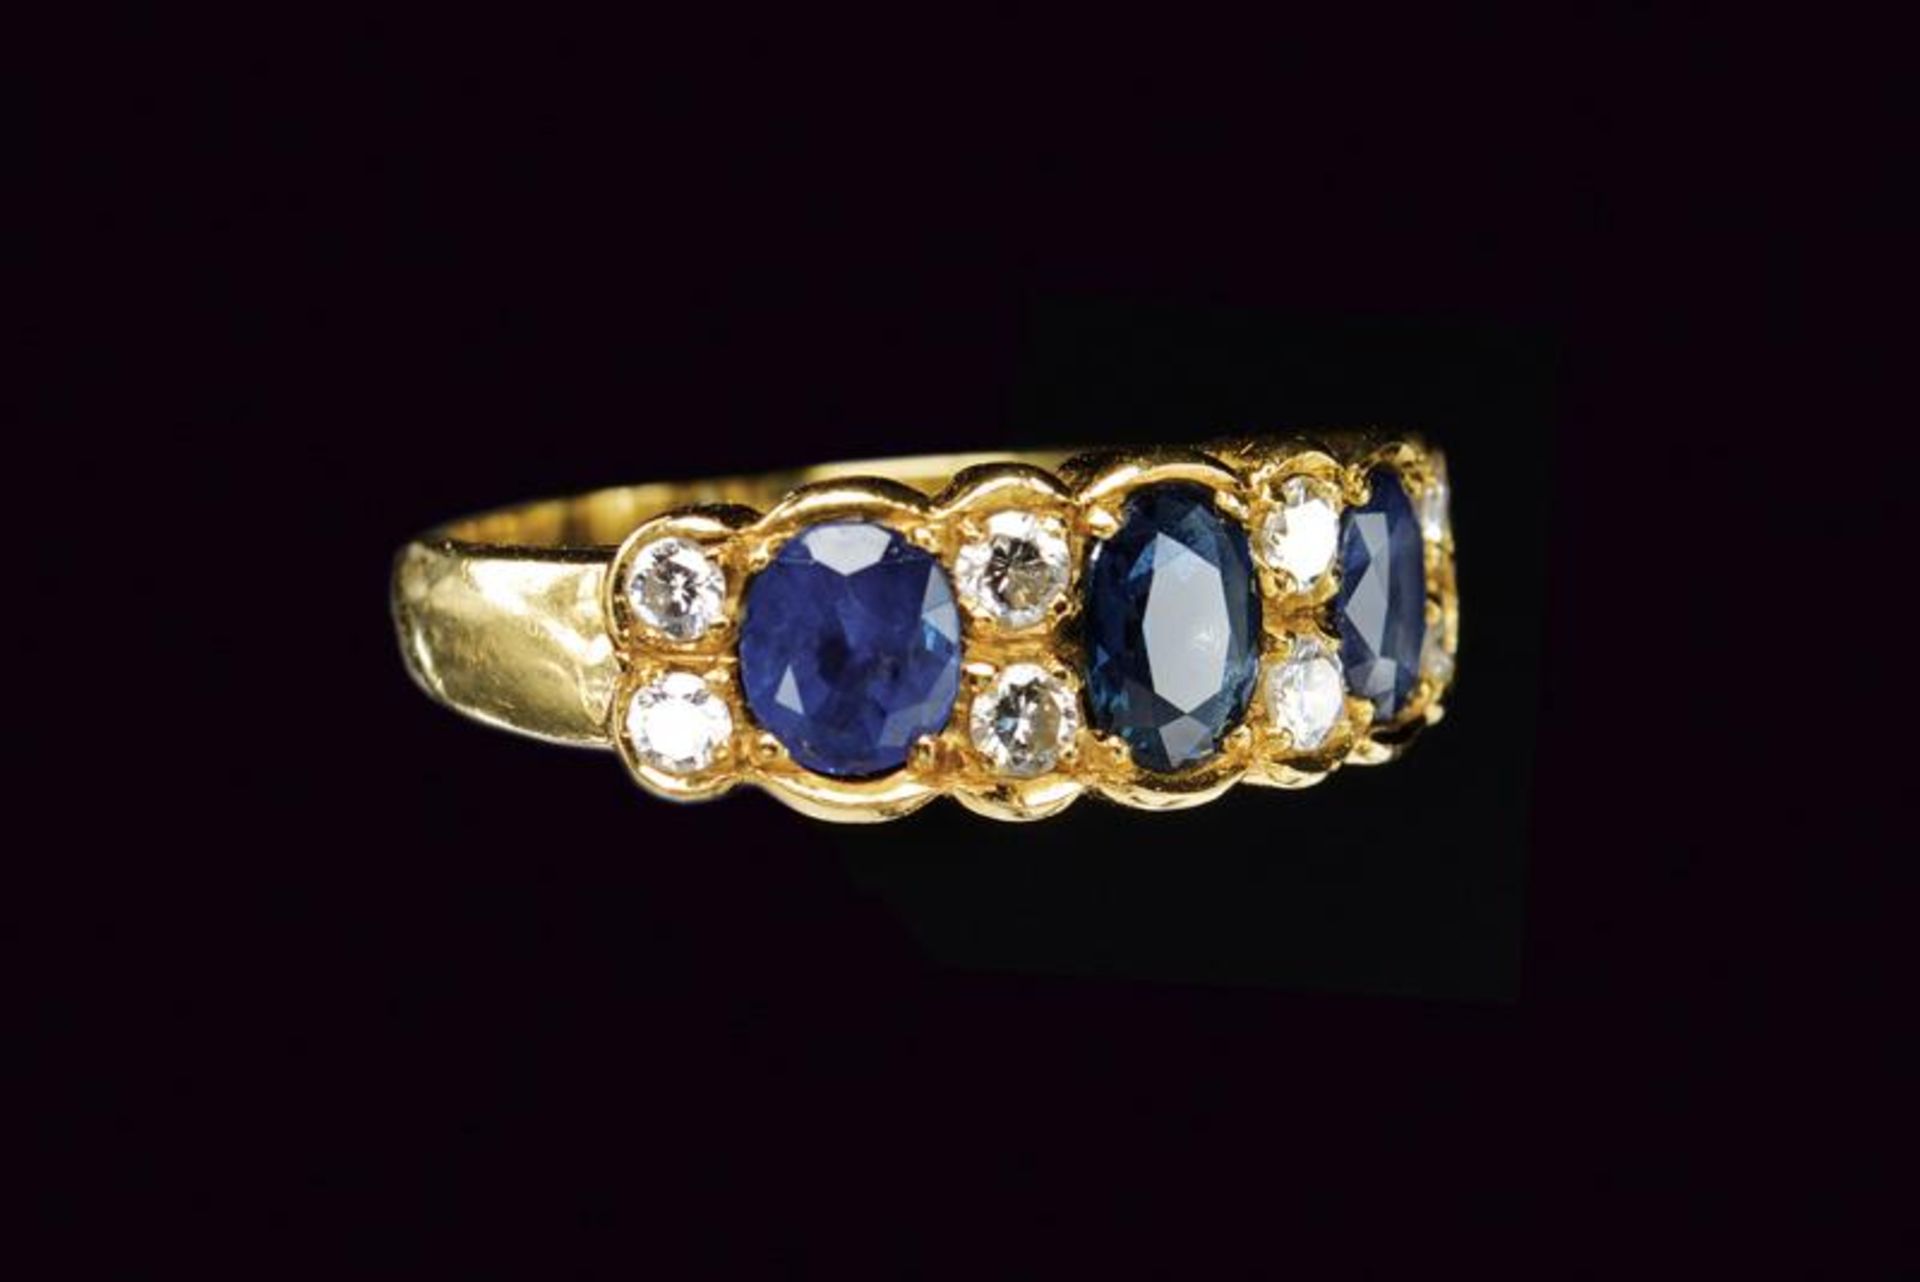 Diamond and sapphire gold band ring - Image 3 of 3